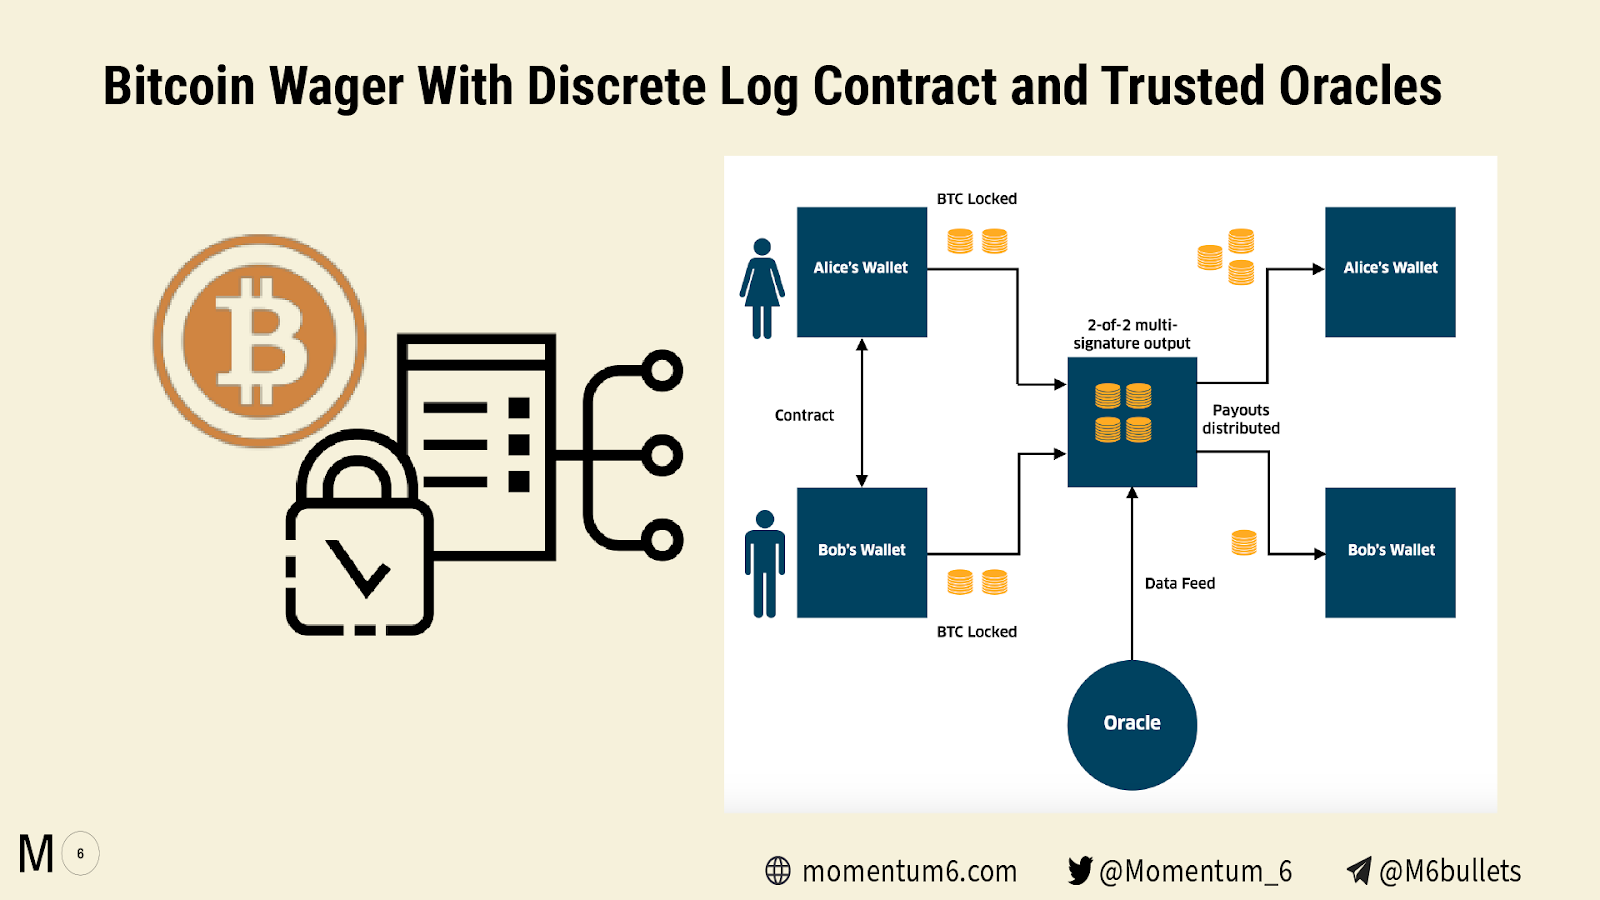 A Discreet Log Contract in the wild